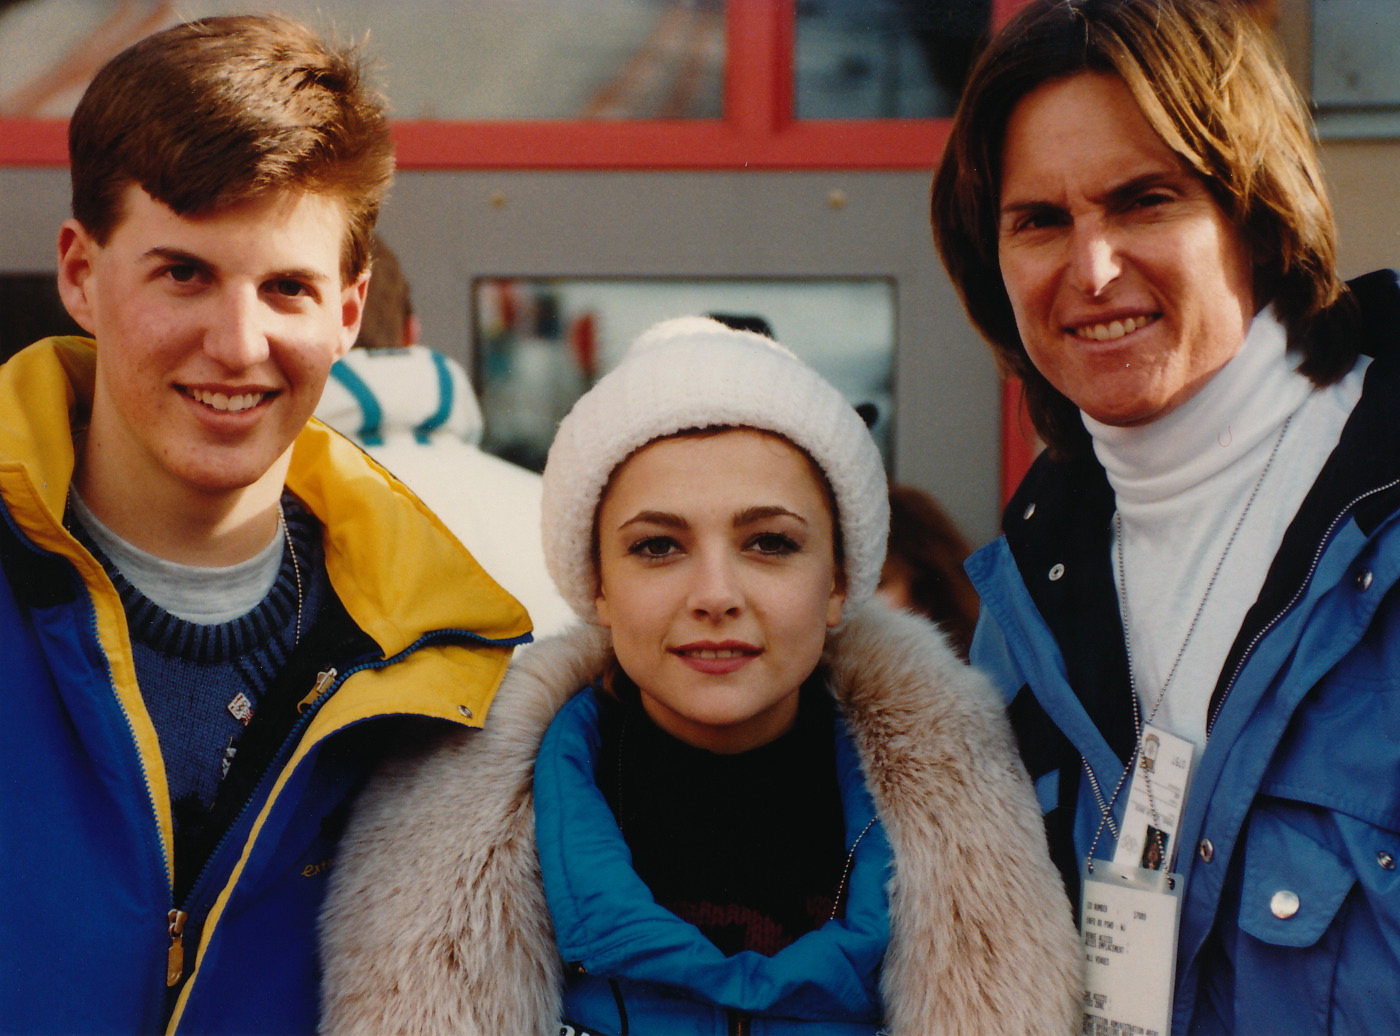 Jeff with Emma Samms and Bruce Jenner in Calgary